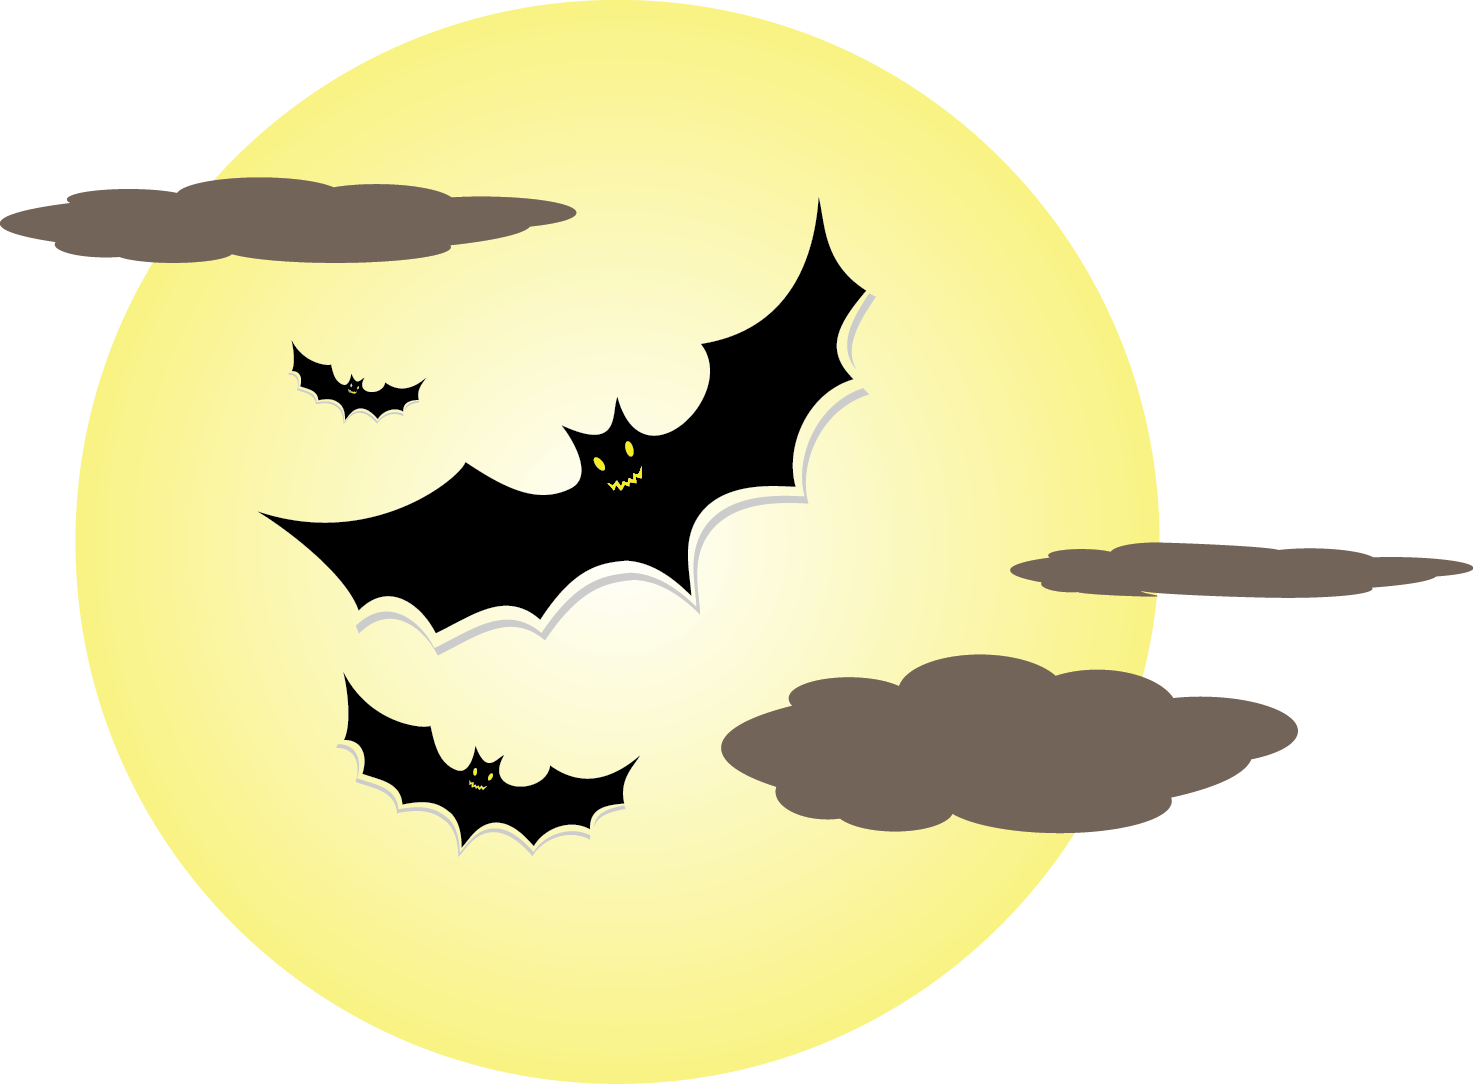 A Group Of Bats Flying In The Sky